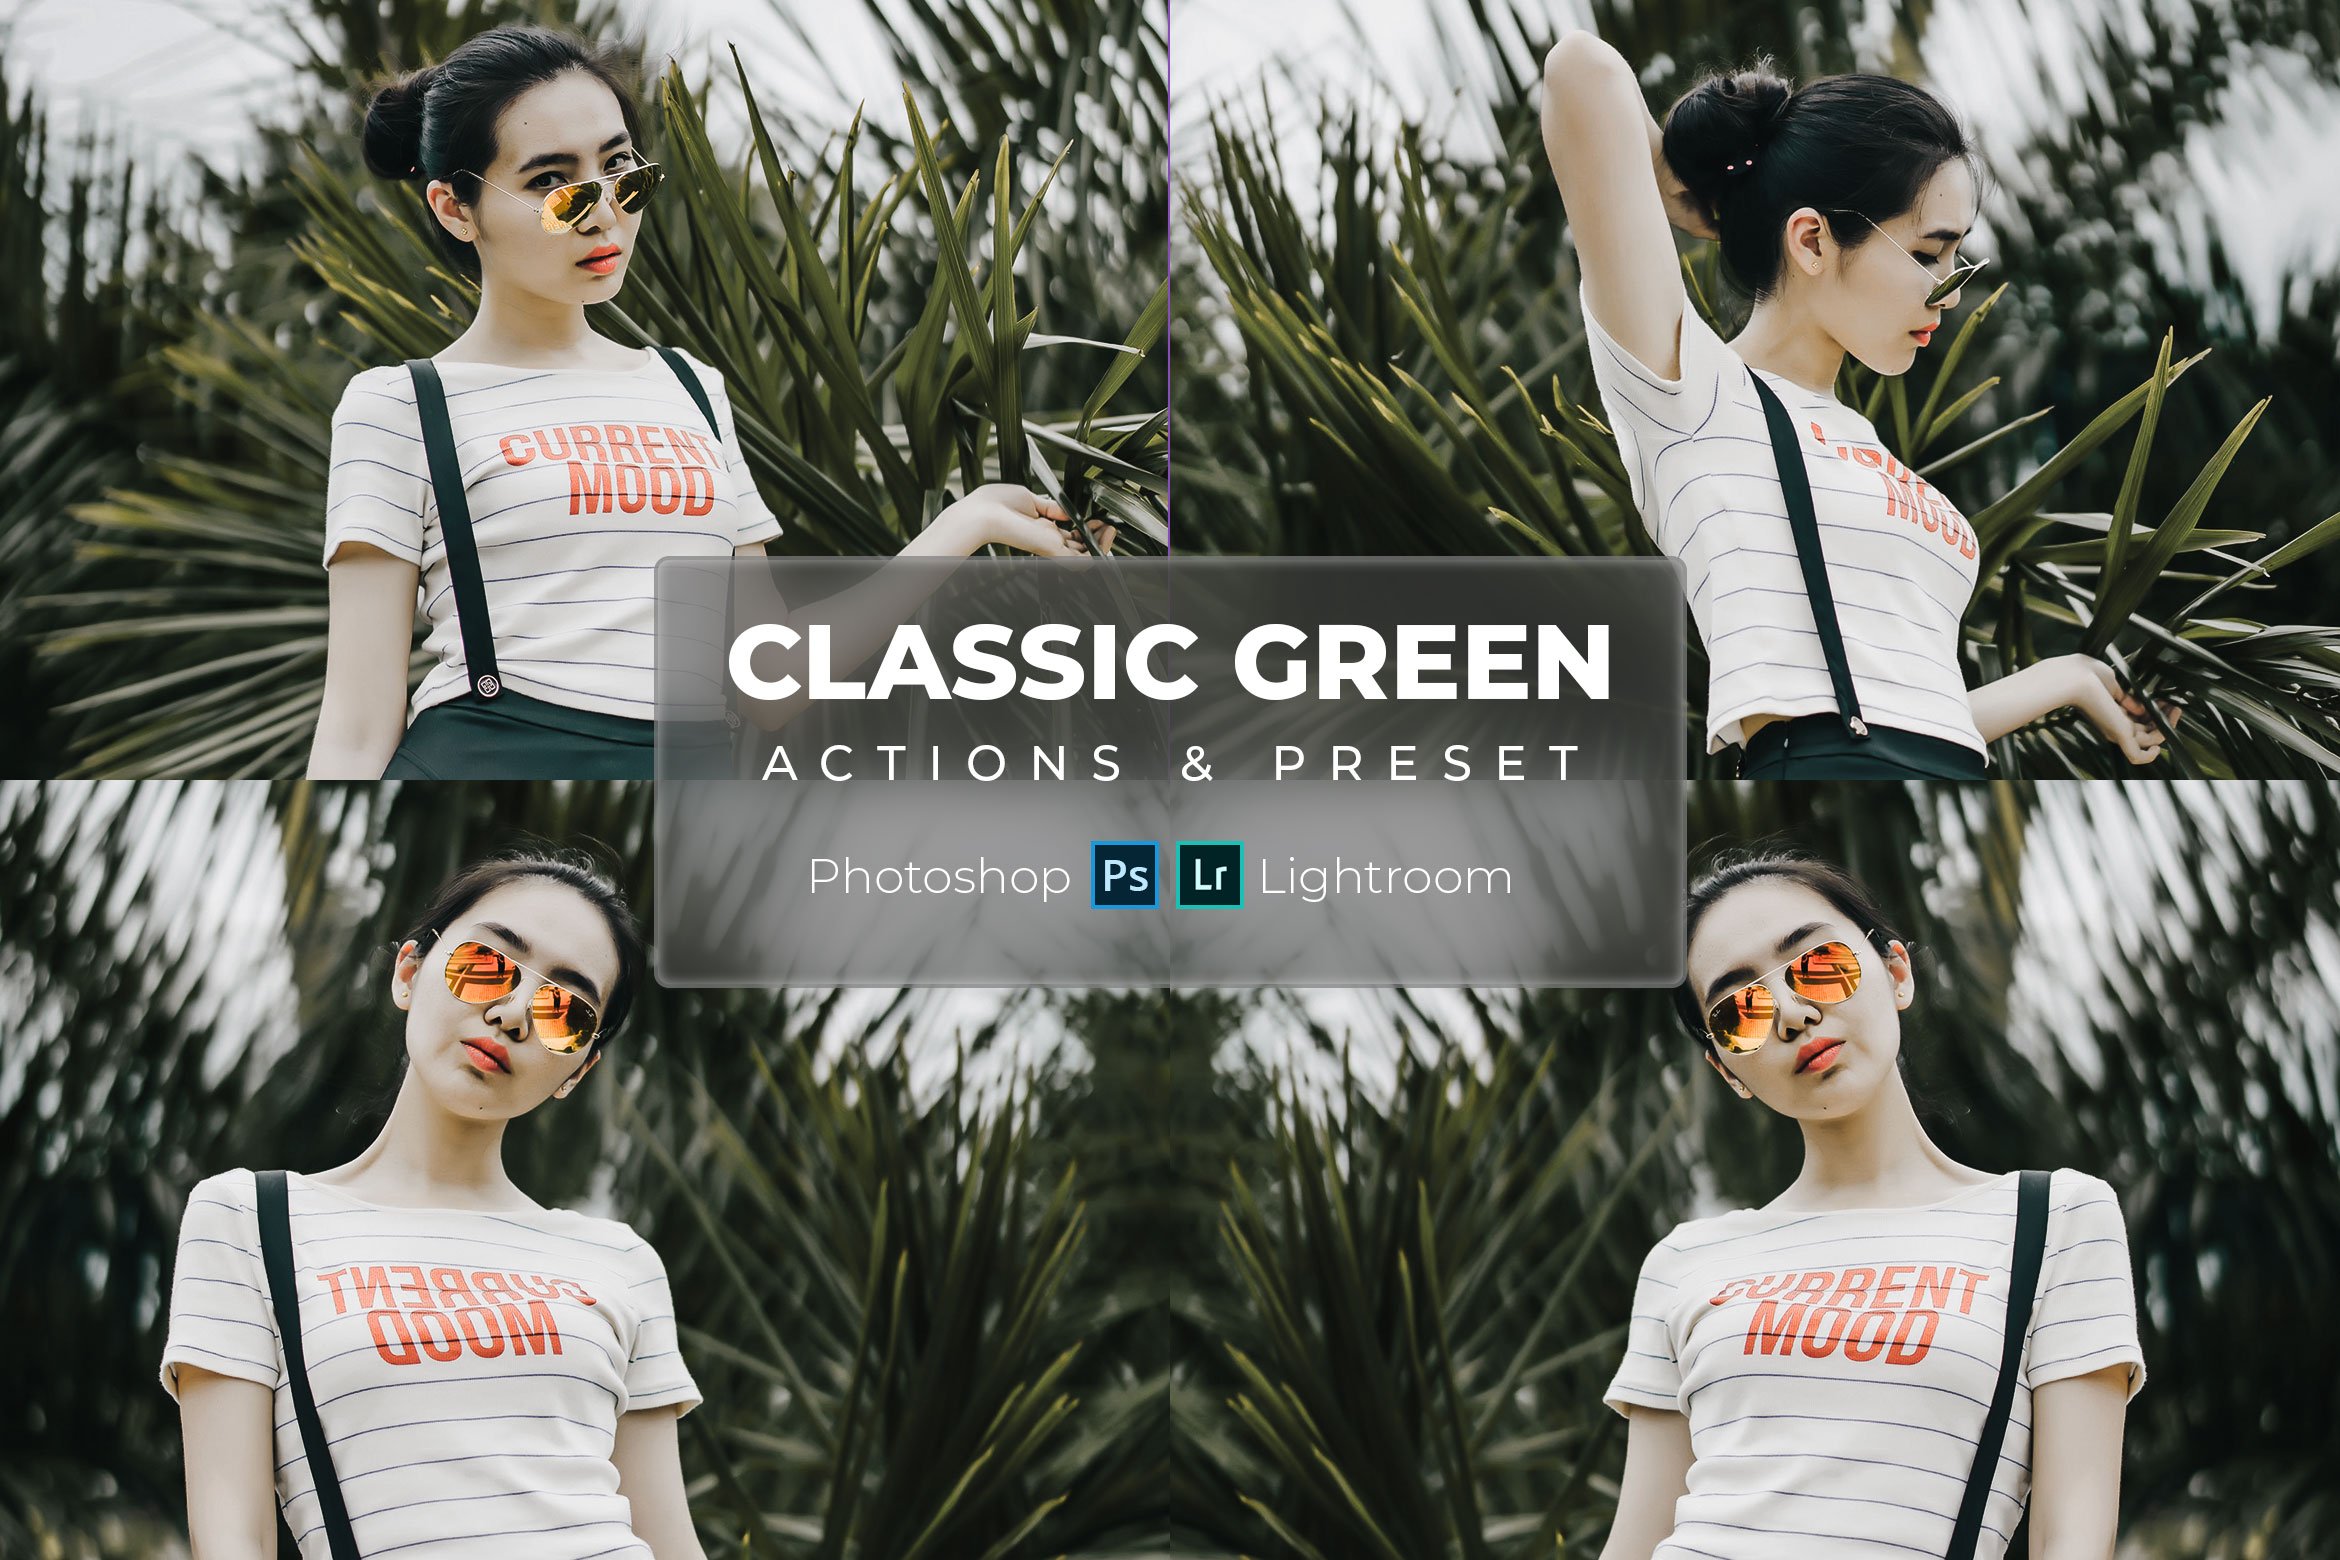 Classic Green Lr Presets & Ps Actioncover image.